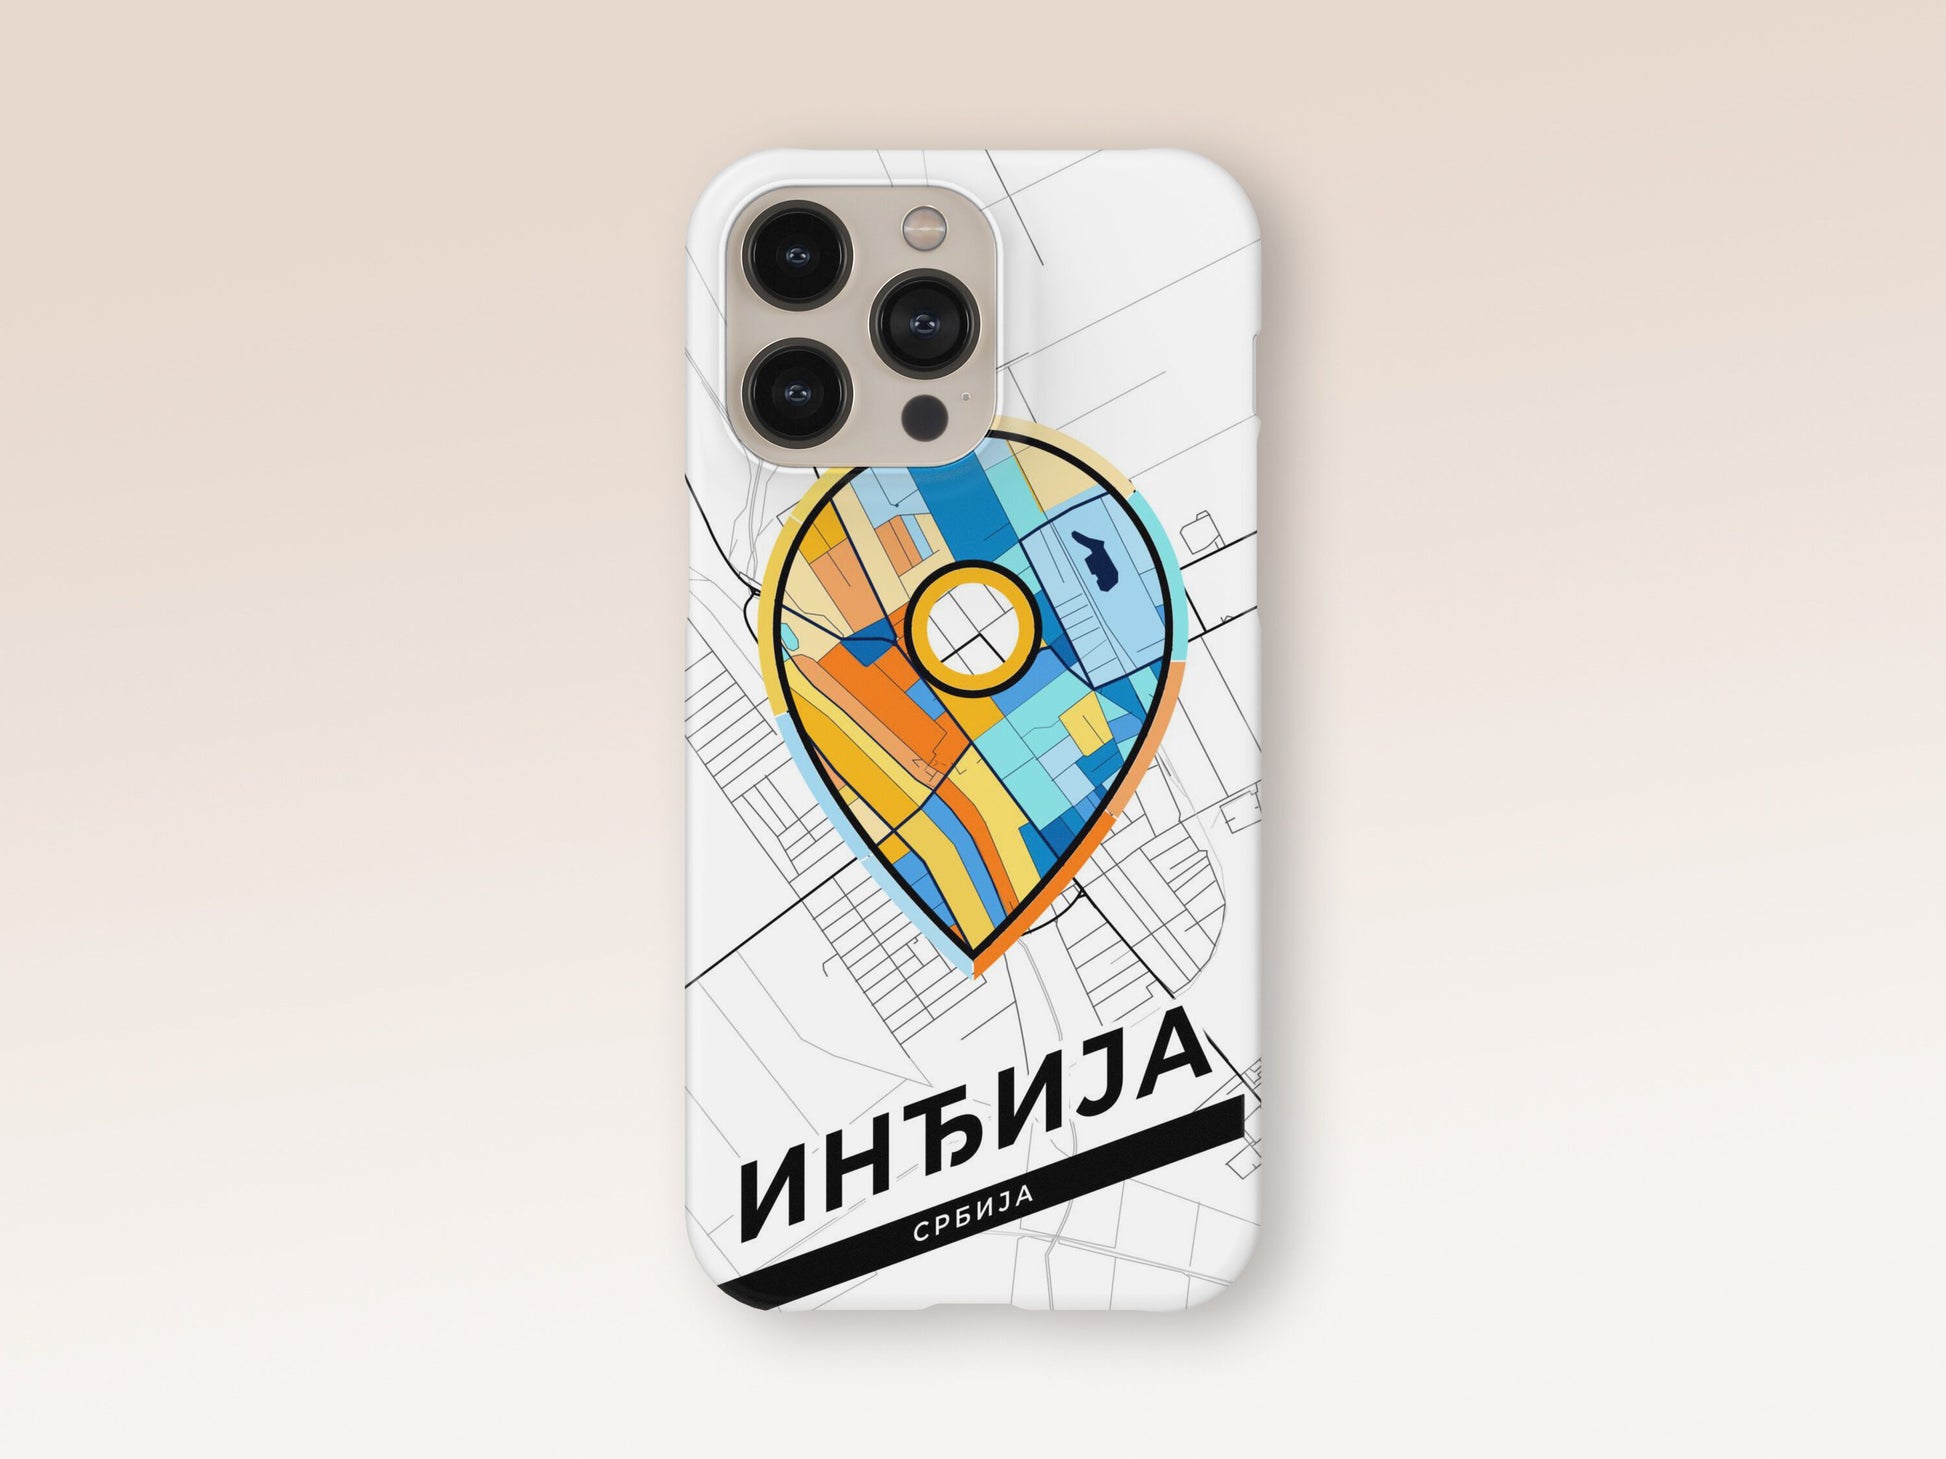 Inđija Serbia slim phone case with colorful icon. Birthday, wedding or housewarming gift. Couple match cases. 1